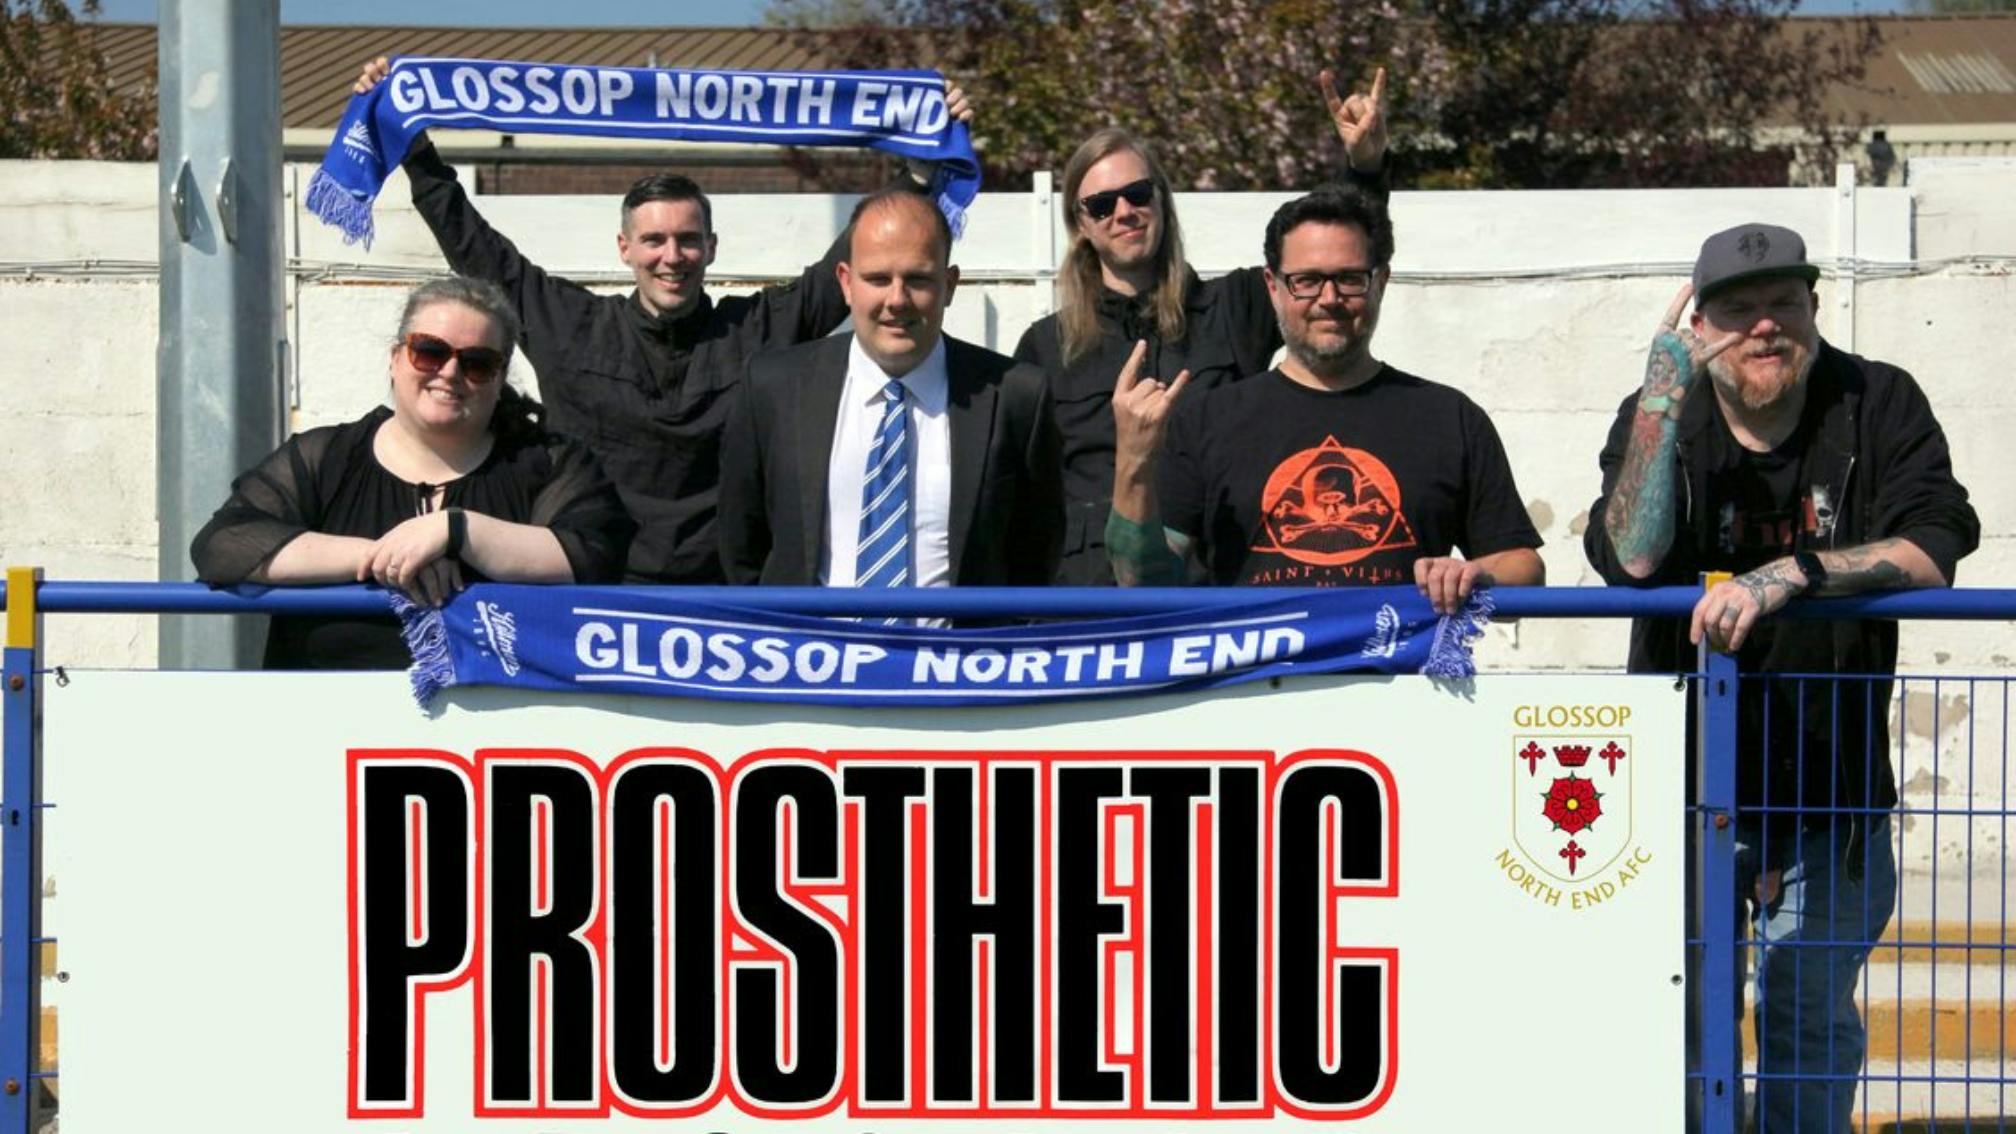 Prosthetic Records is now the main sponsor of Glossop North End football club